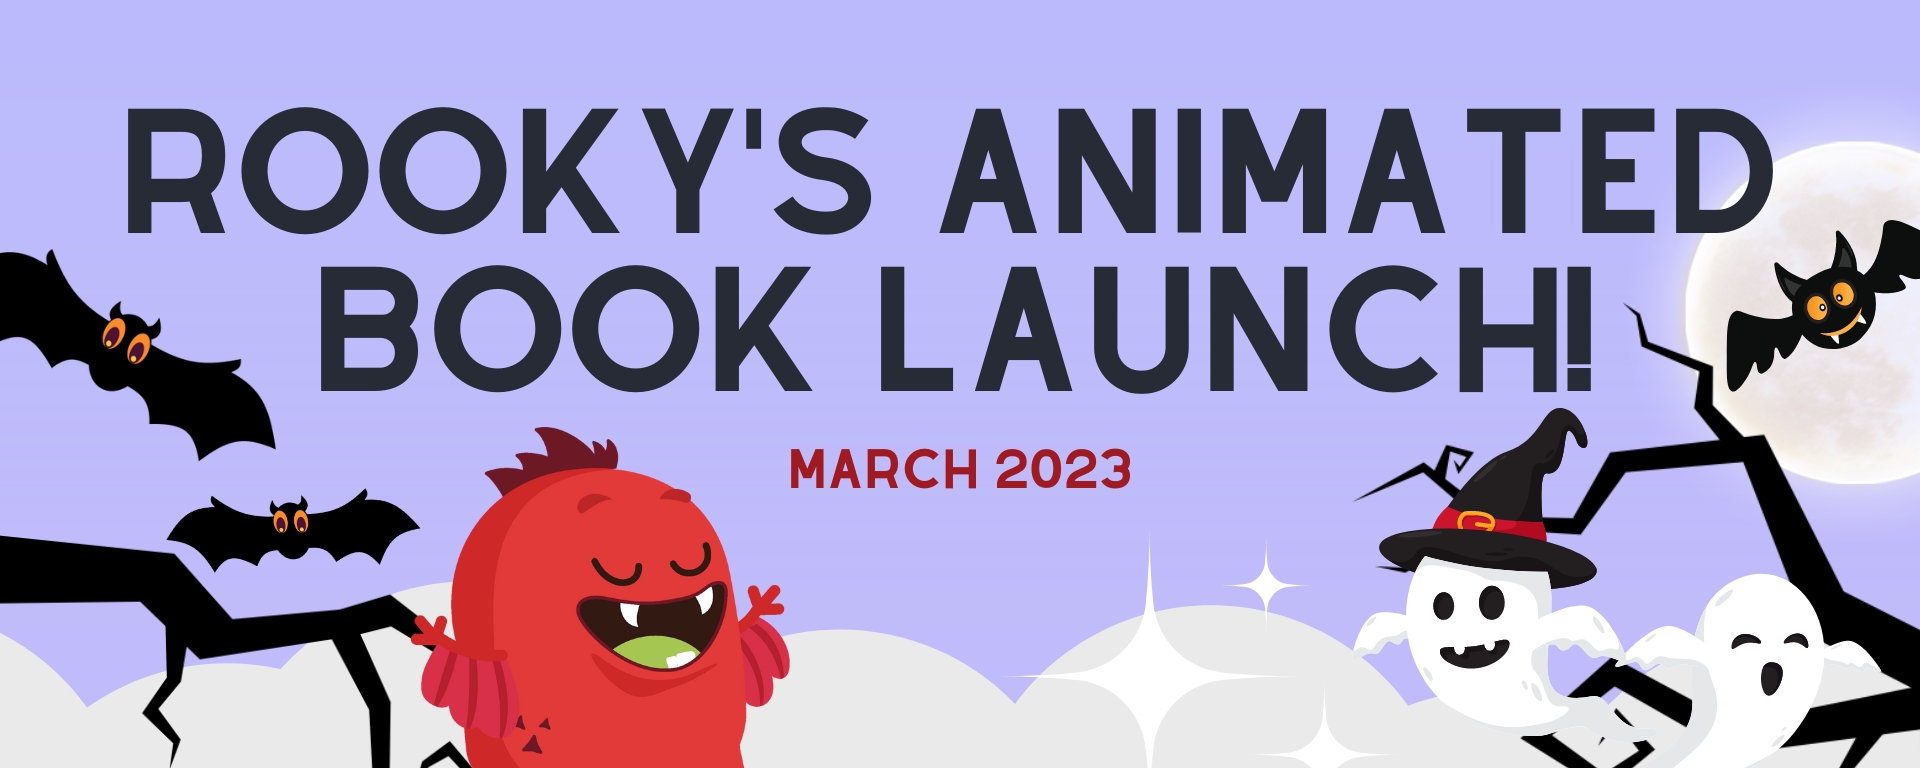 Rooky’s Animated Book Launch image